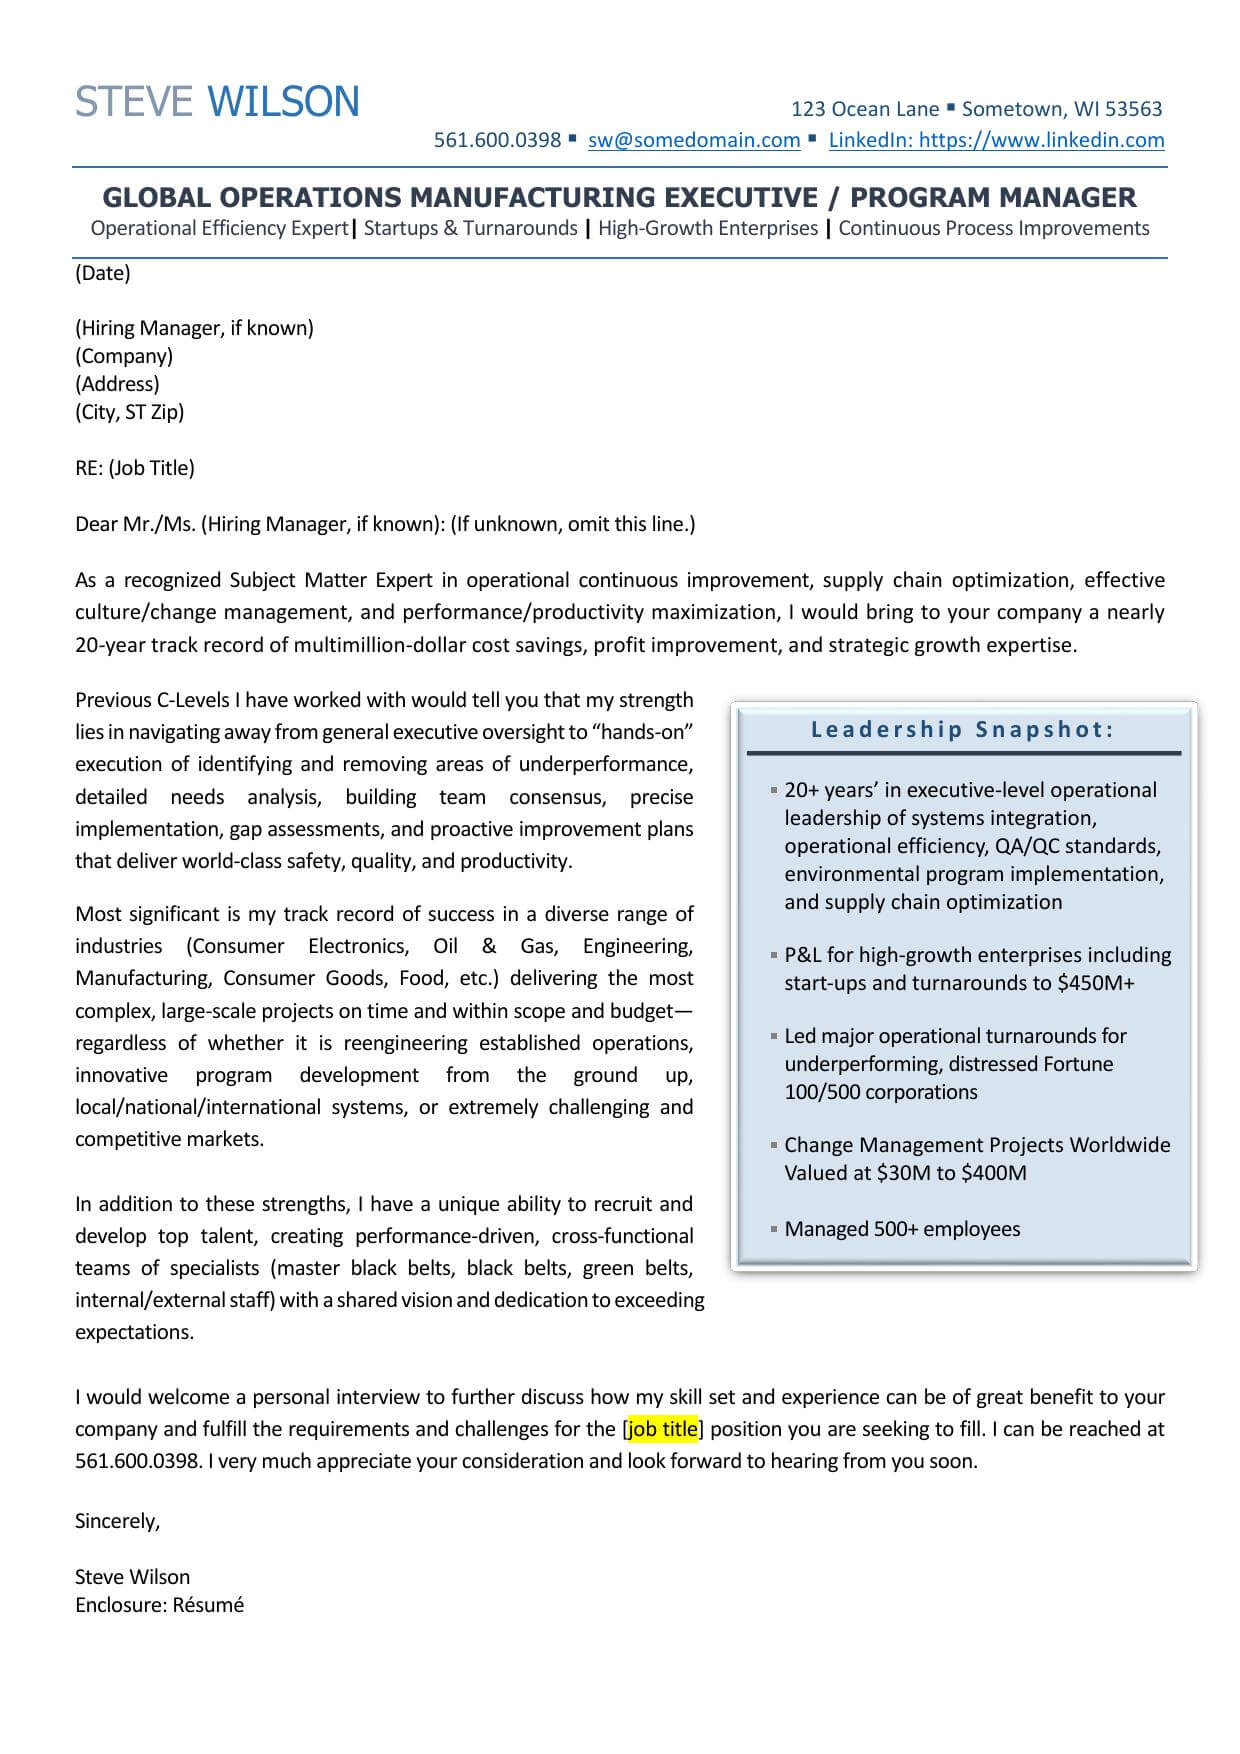 Global Manufacturing Executive Cover Letter (1)